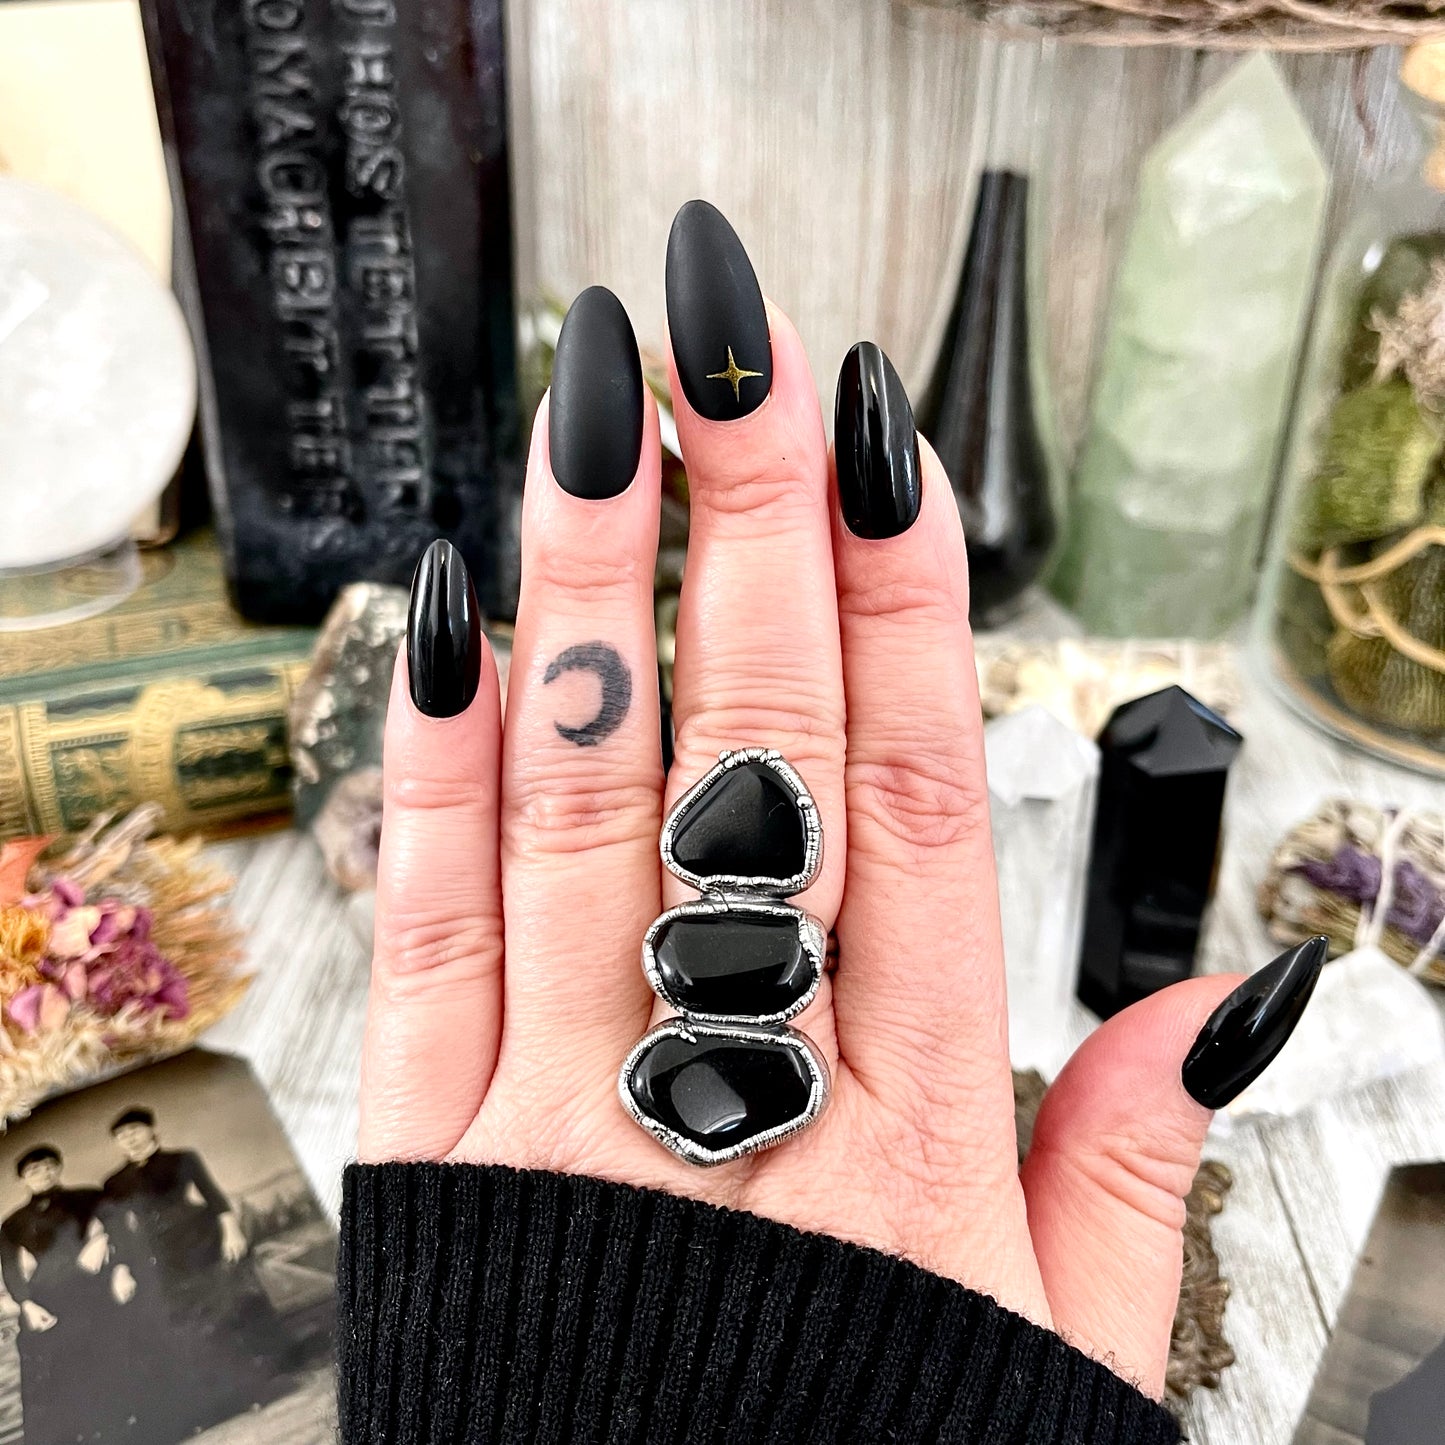 Size 8 Crystal Ring - Three Stone Black Onyx Ring in Silver / Foxlark Collection - One of a Kind